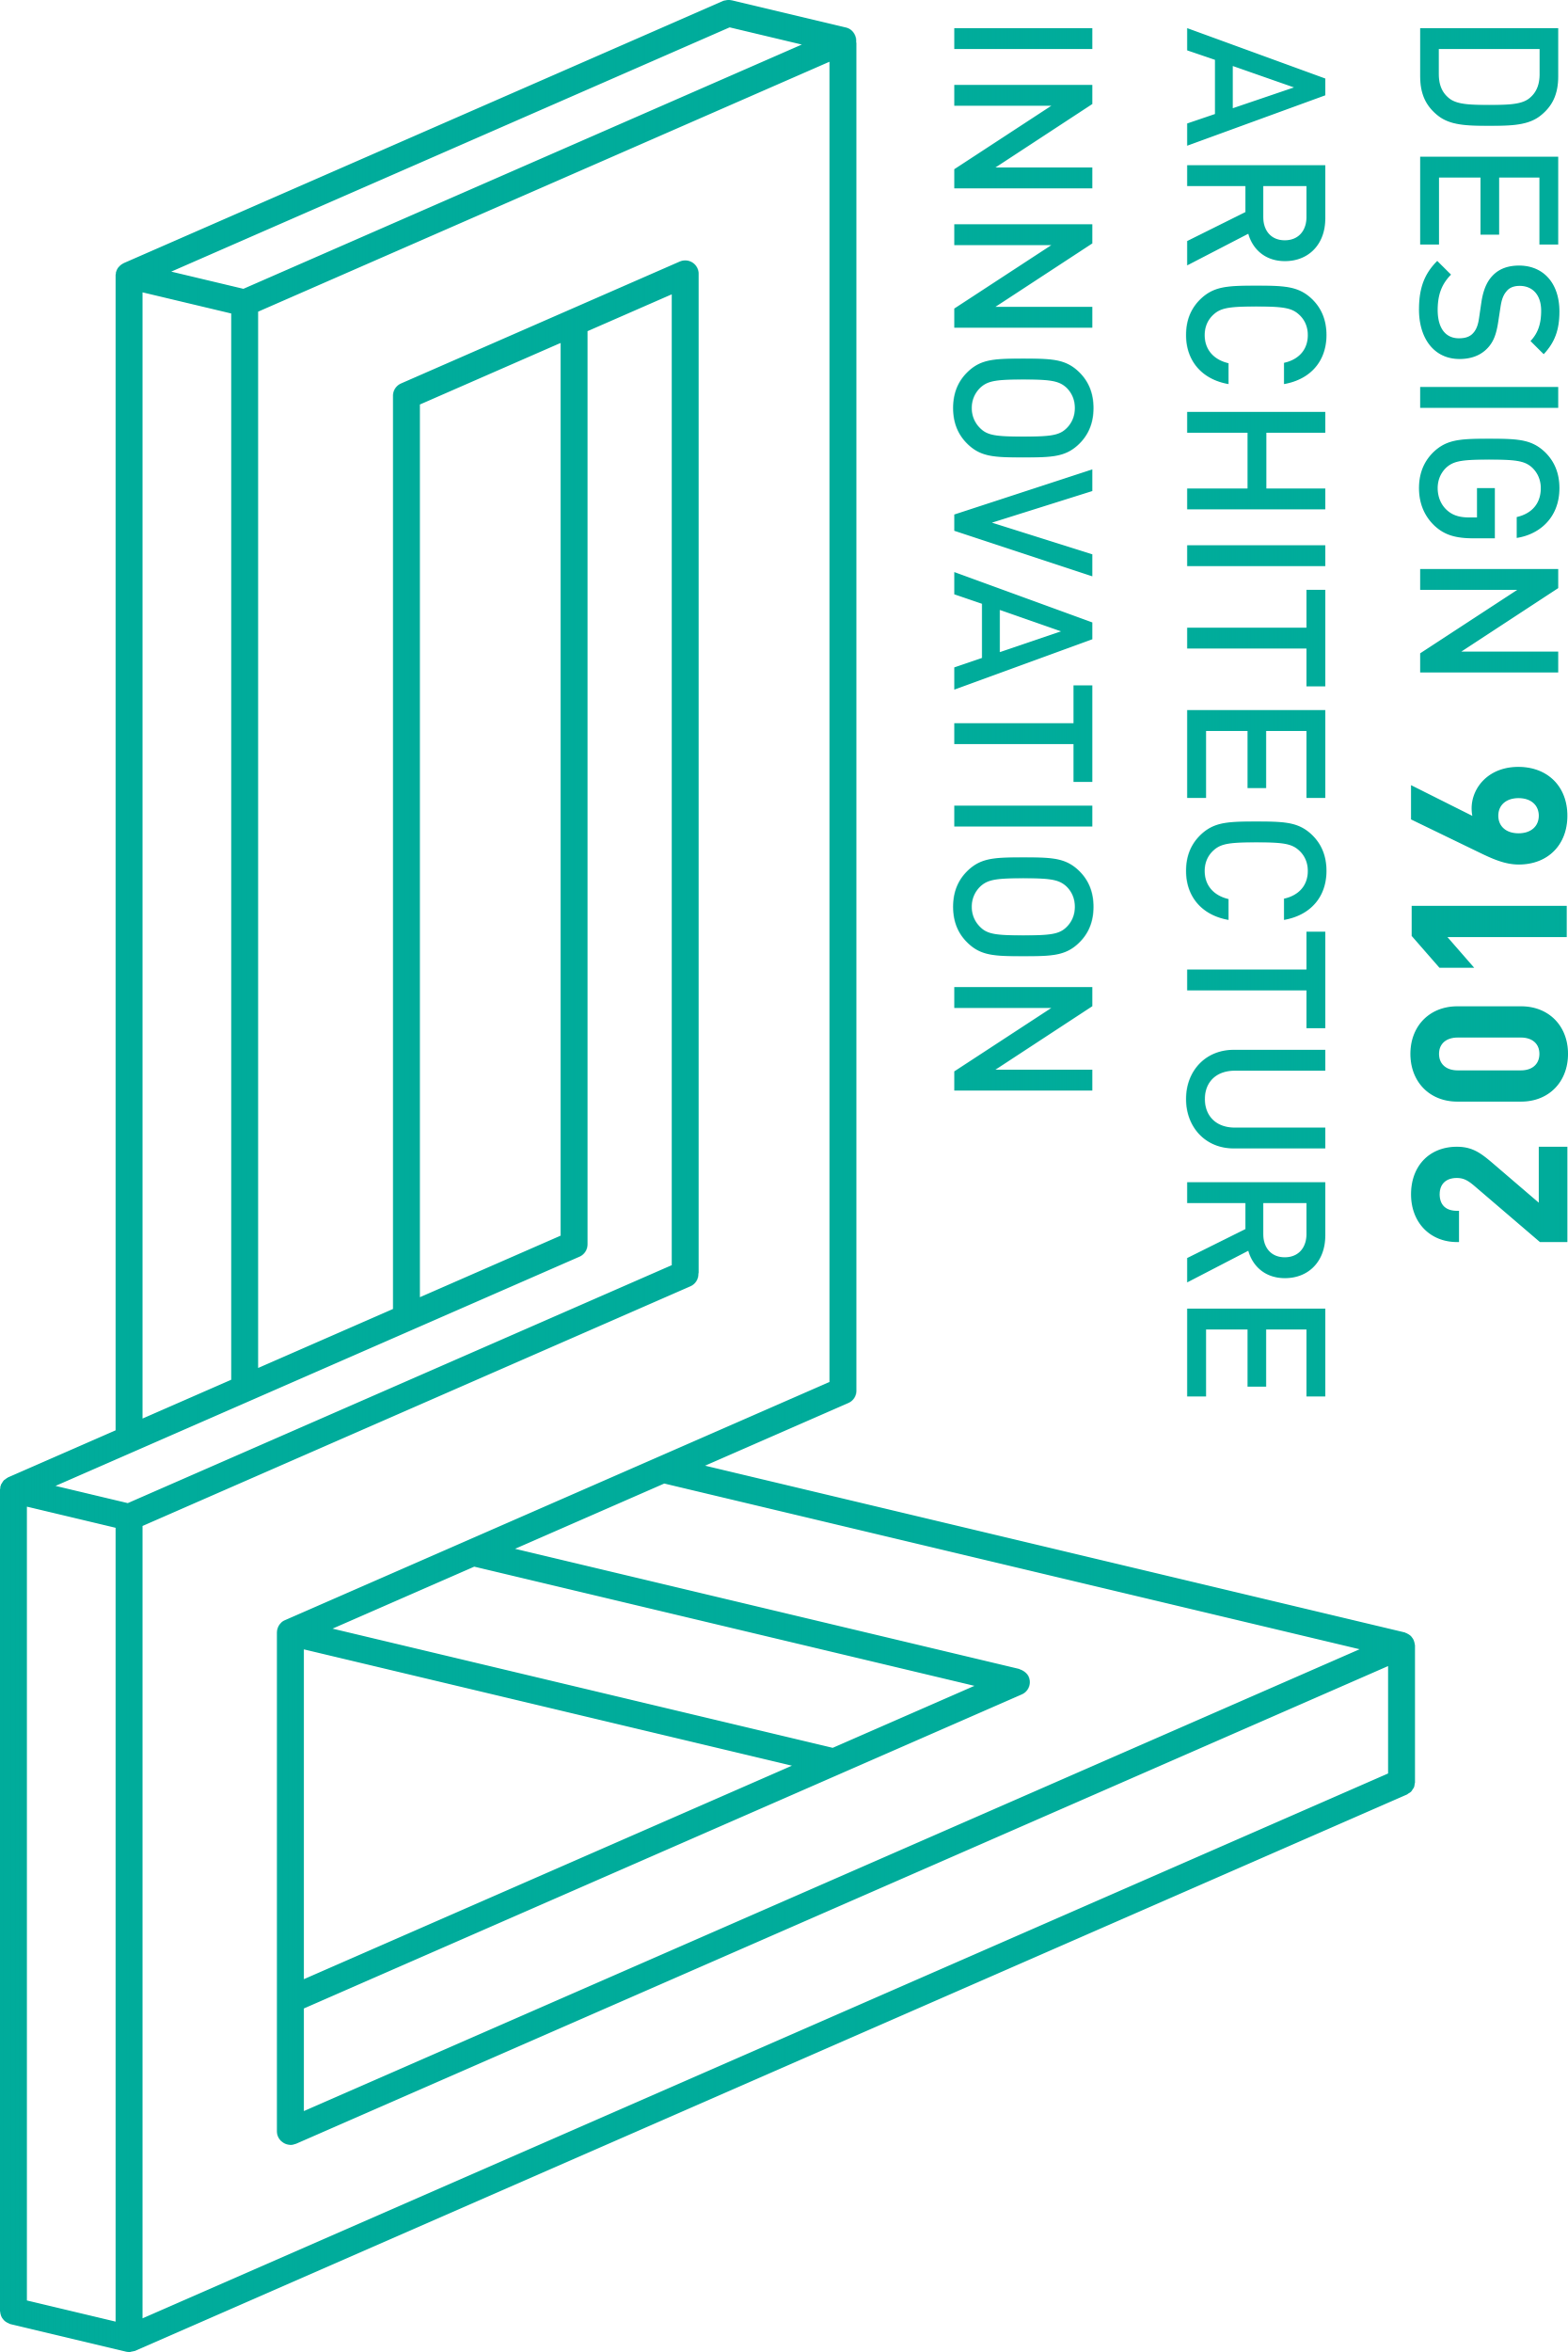 Year of Innovation, Architecture and Design 2016 logo